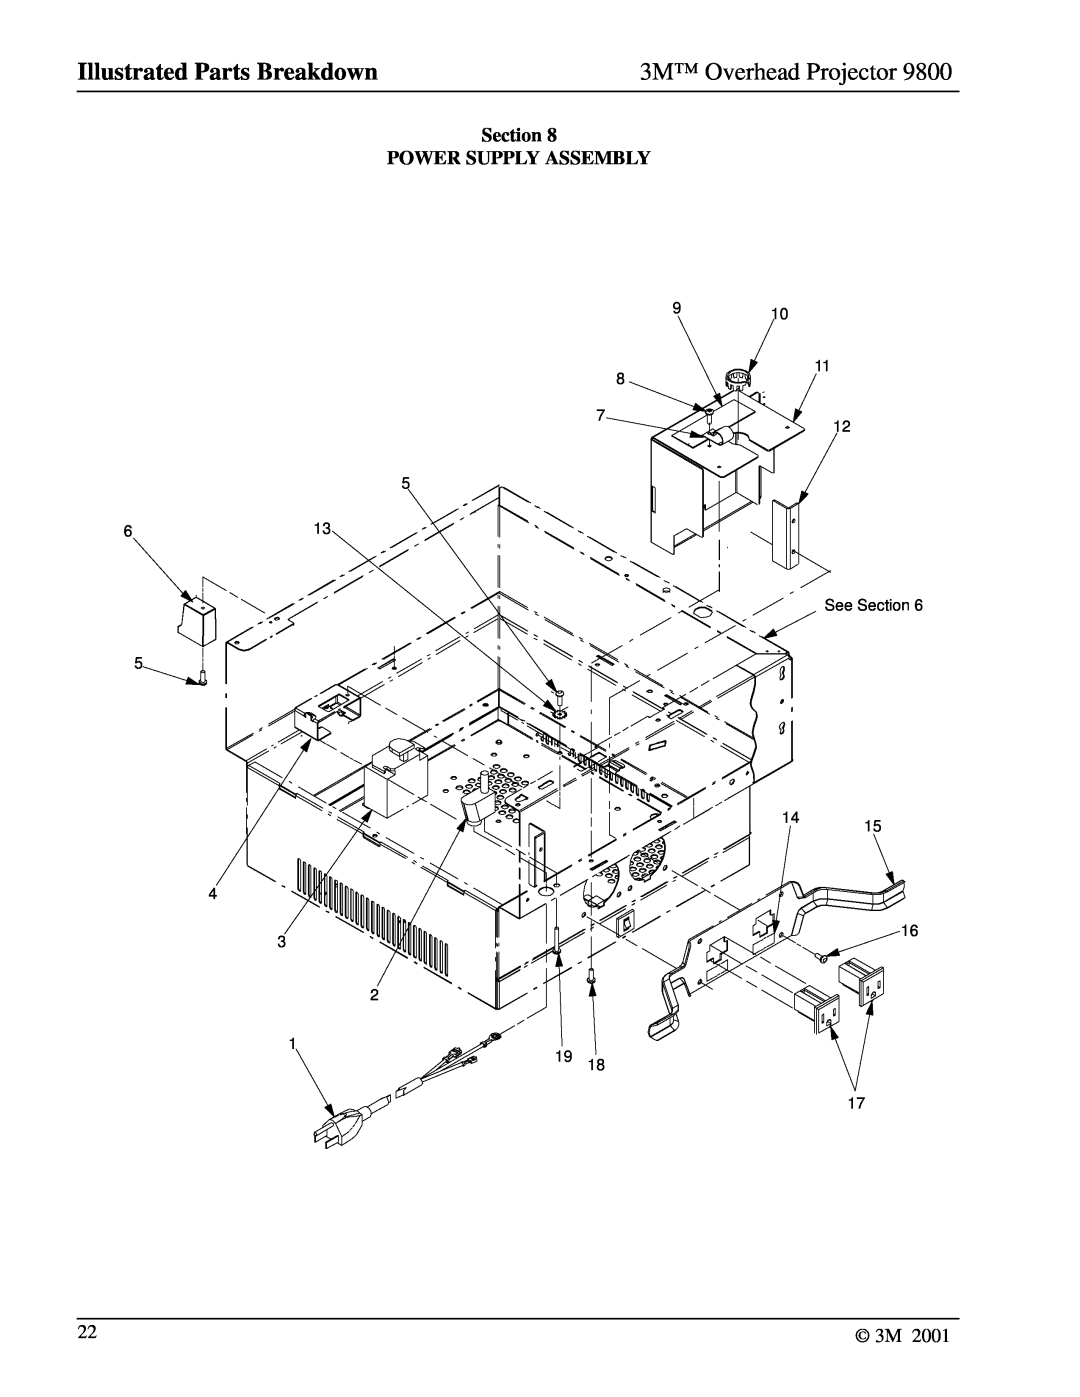 3M 9800 manual Section POWER SUPPLY ASSEMBLY, Illustrated Parts Breakdown, 3M Overhead Projector 